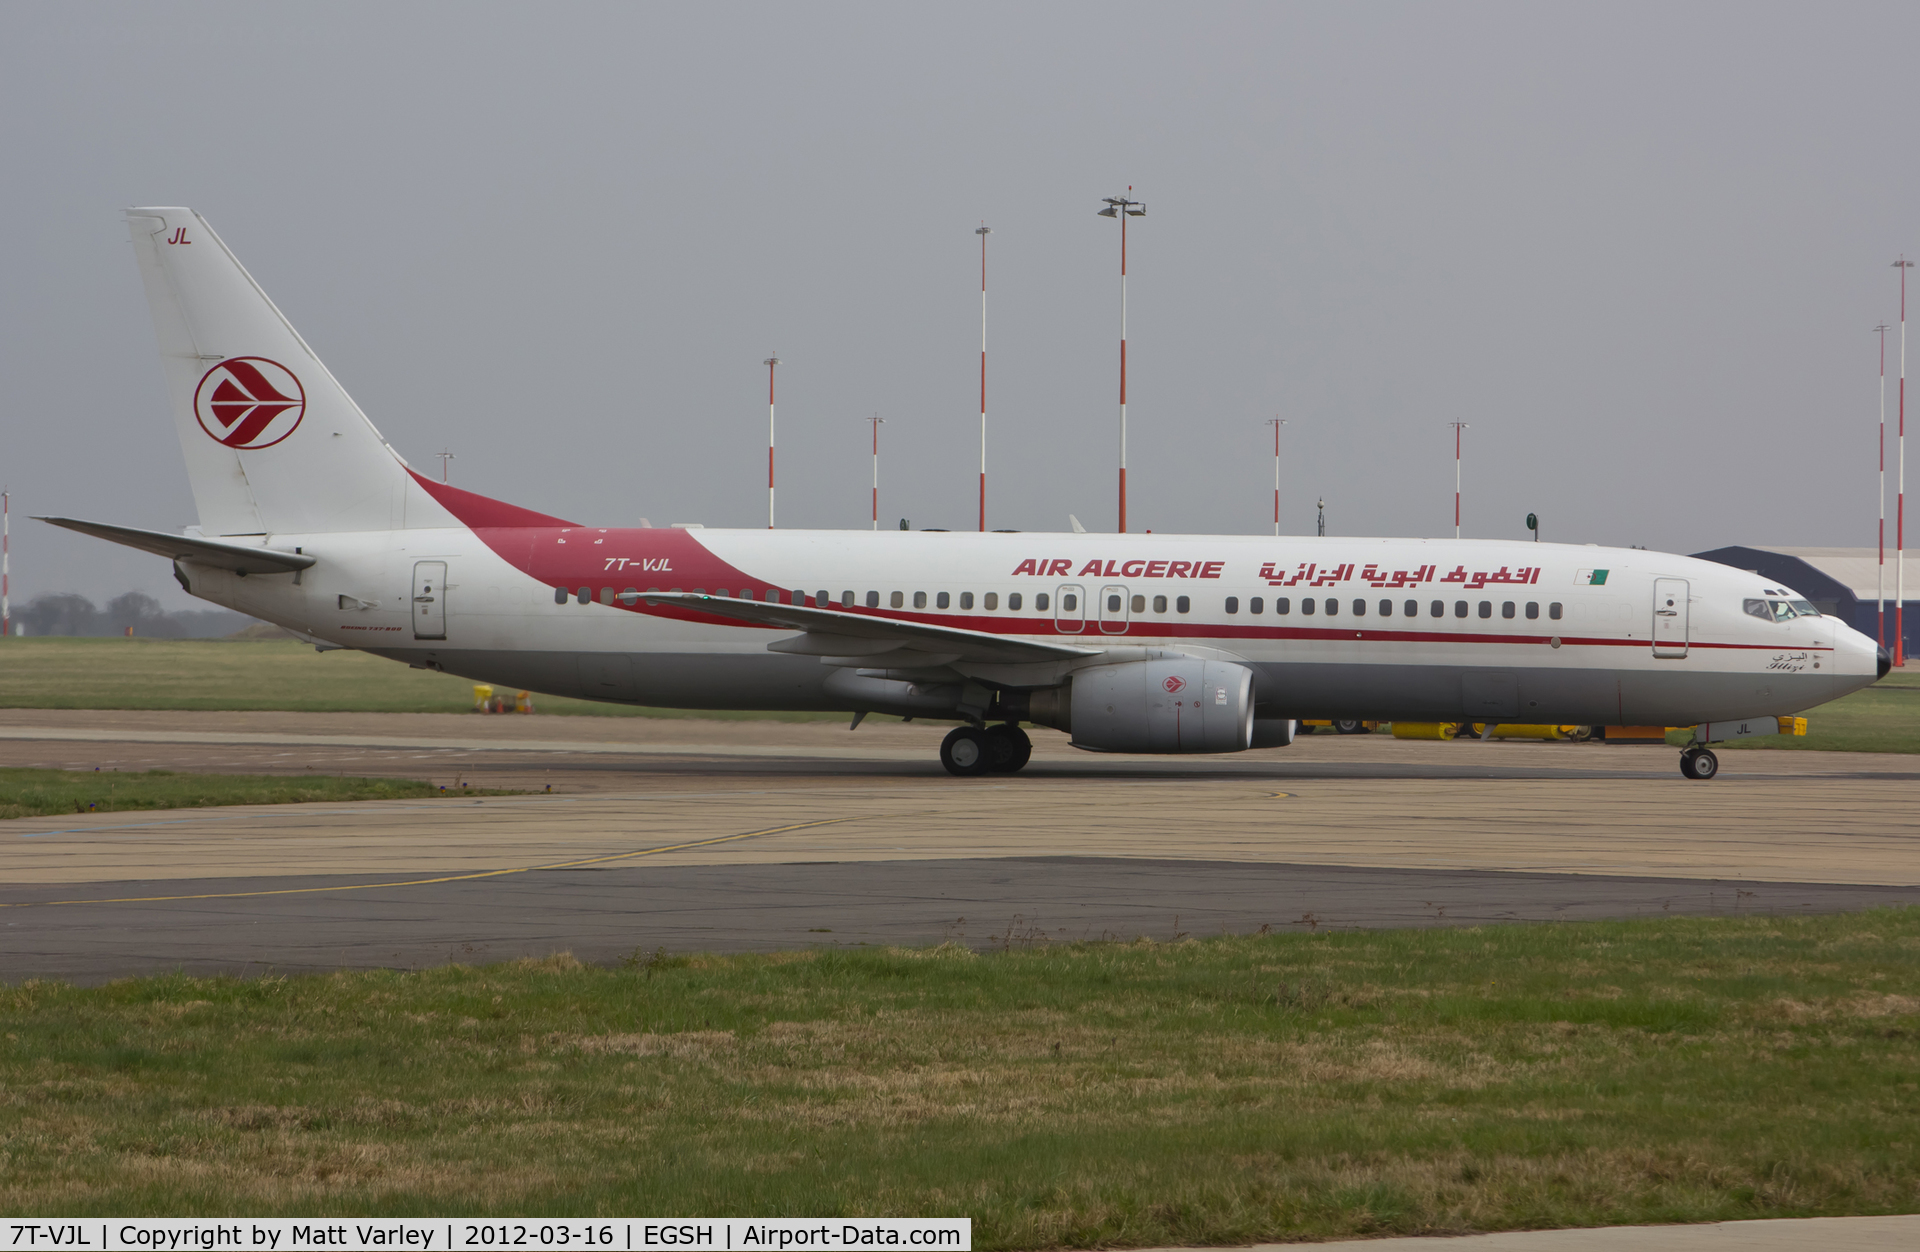 7T-VJL, 2000 Boeing 737-8D6 C/N 30204, Taxiing to stand 5.